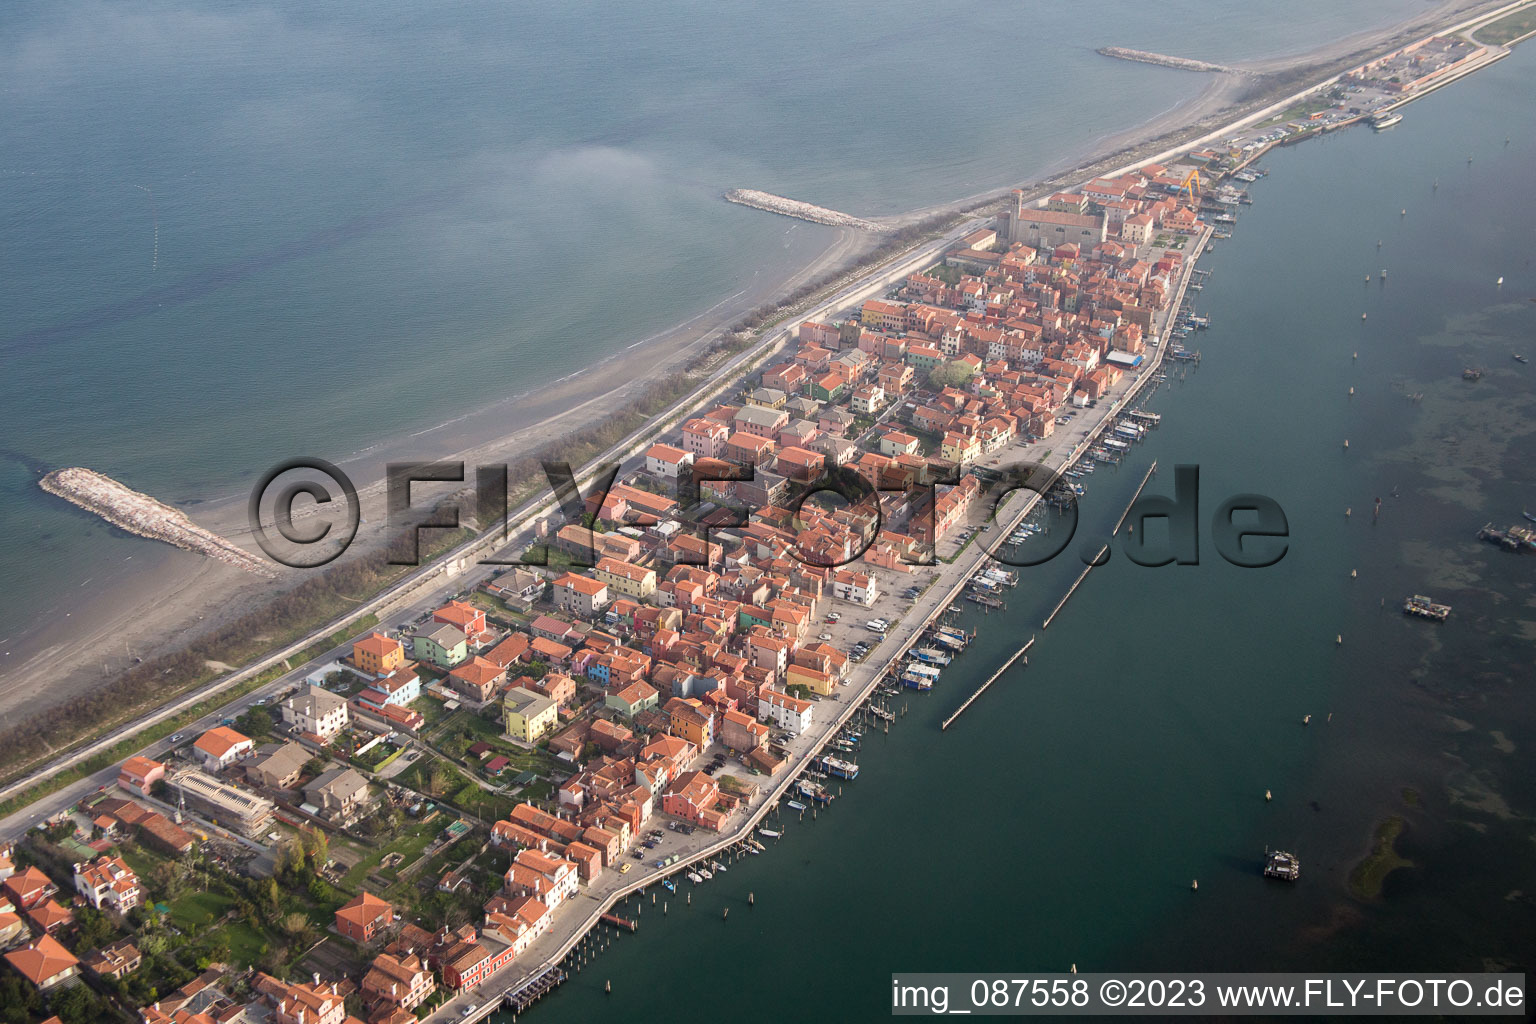 Townscape on the seacoast of Mediterranean Sea in San Vito in Veneto, Italy seen from above